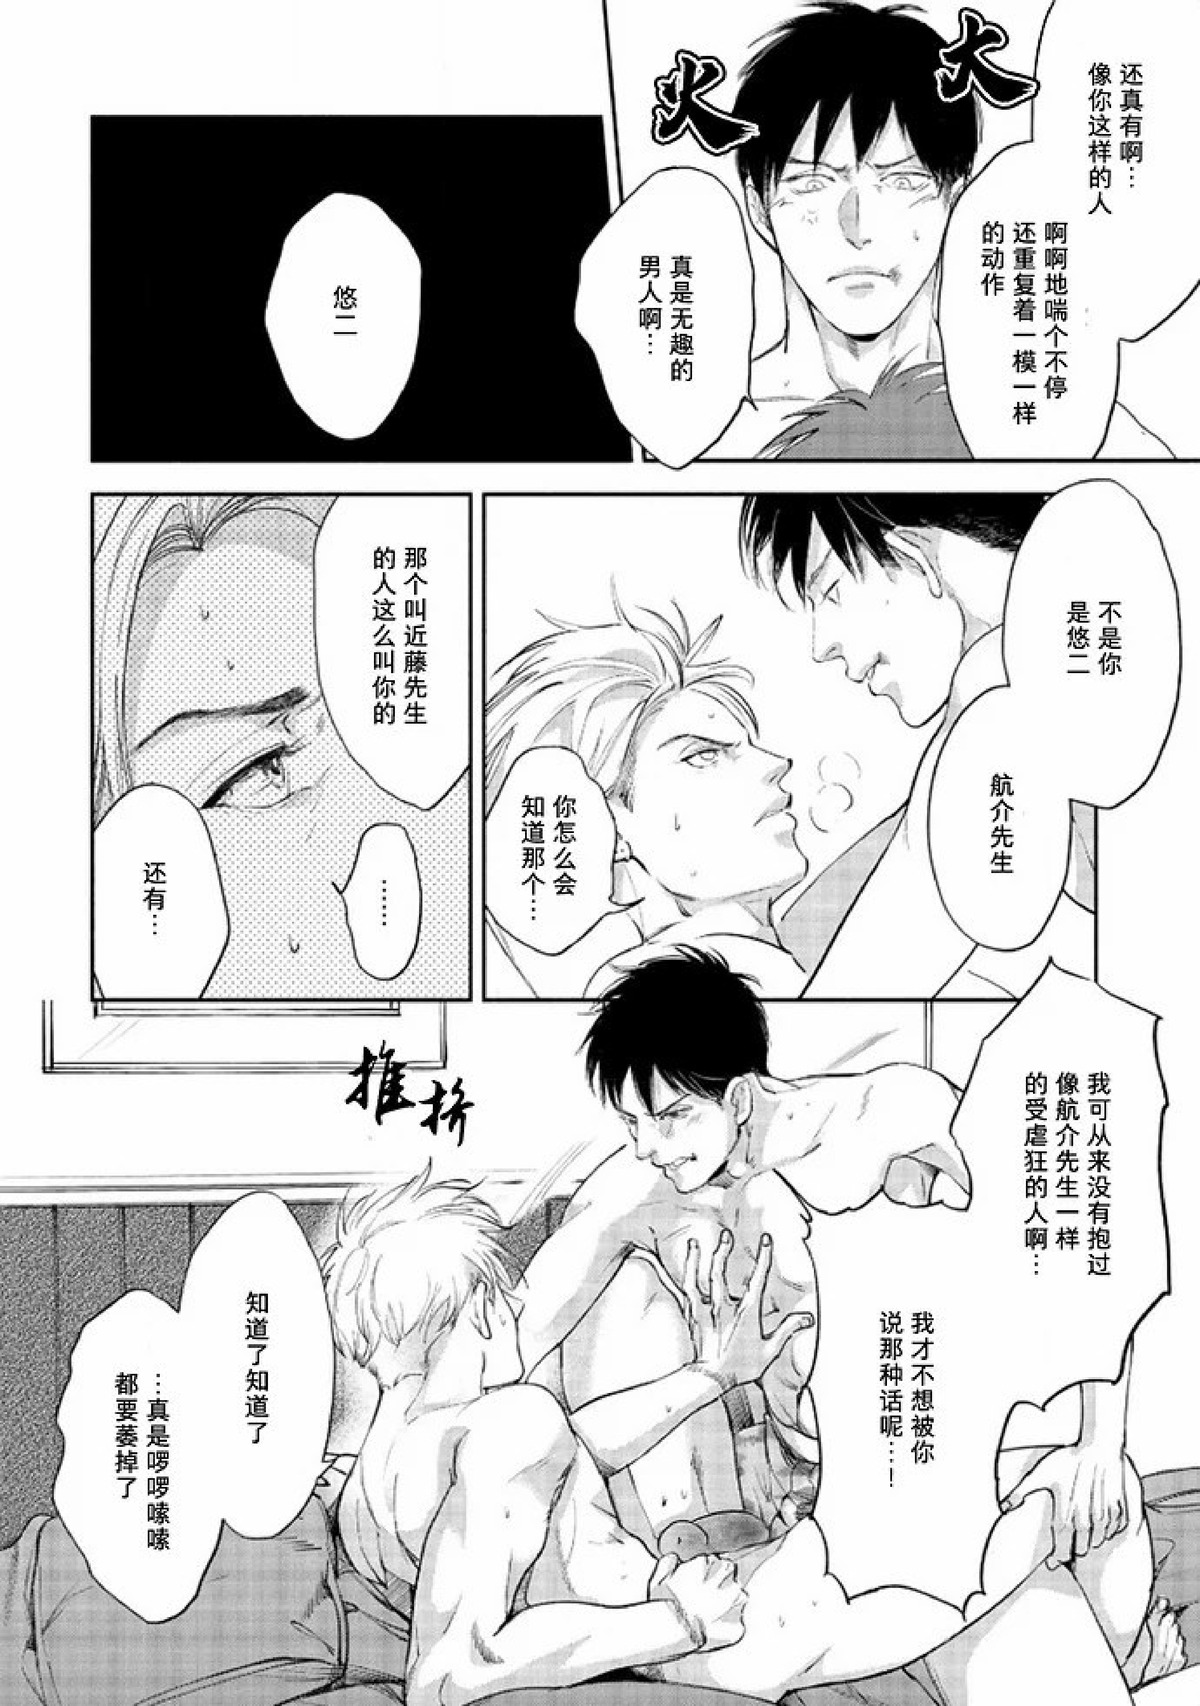 【Two sides of the same coin[腐漫]】漫画-（上卷01-02）章节漫画下拉式图片-93.jpg